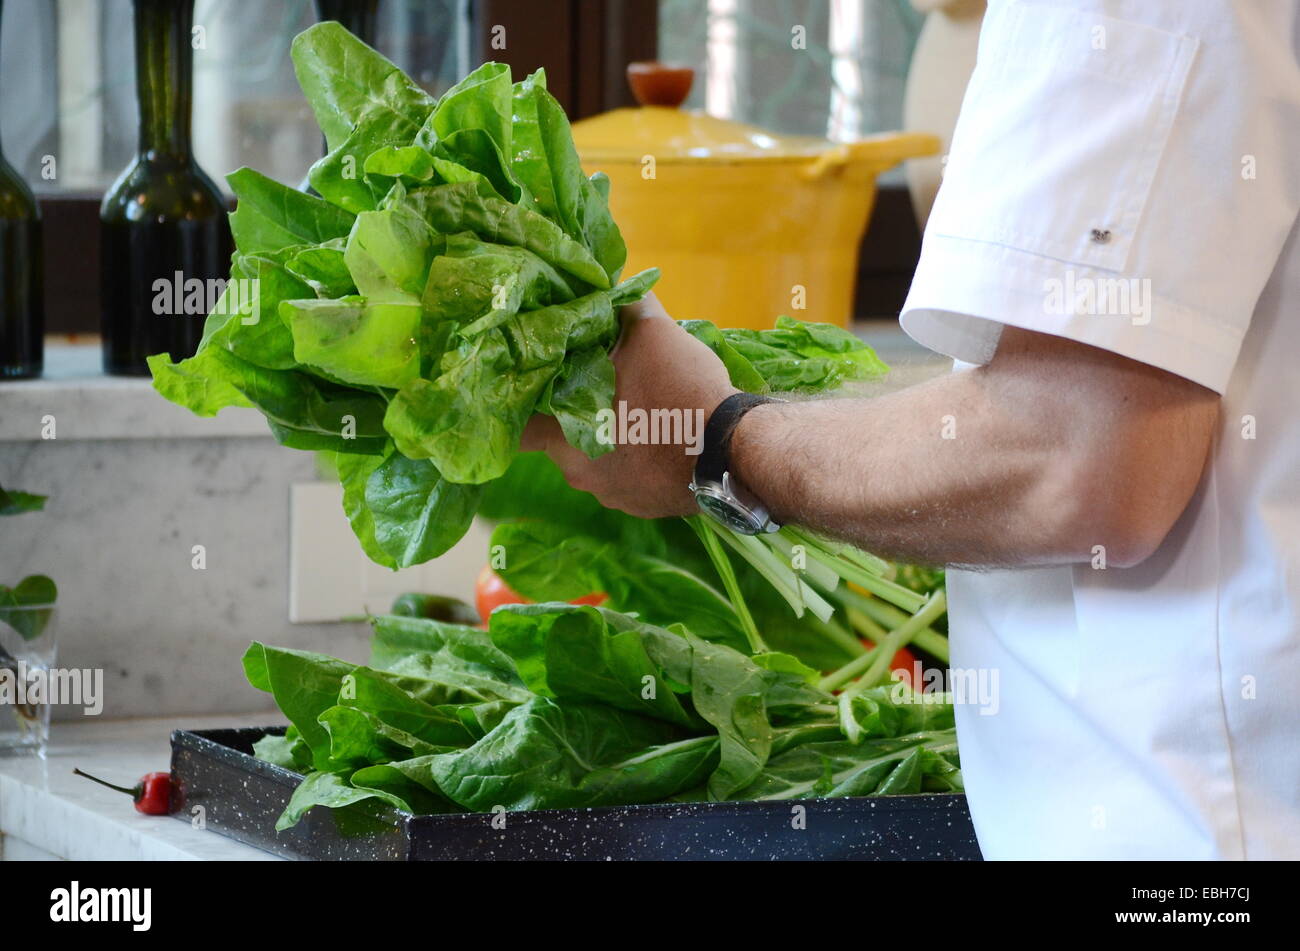 A cook's hand grabbing fresh chard leaves Stock Photo